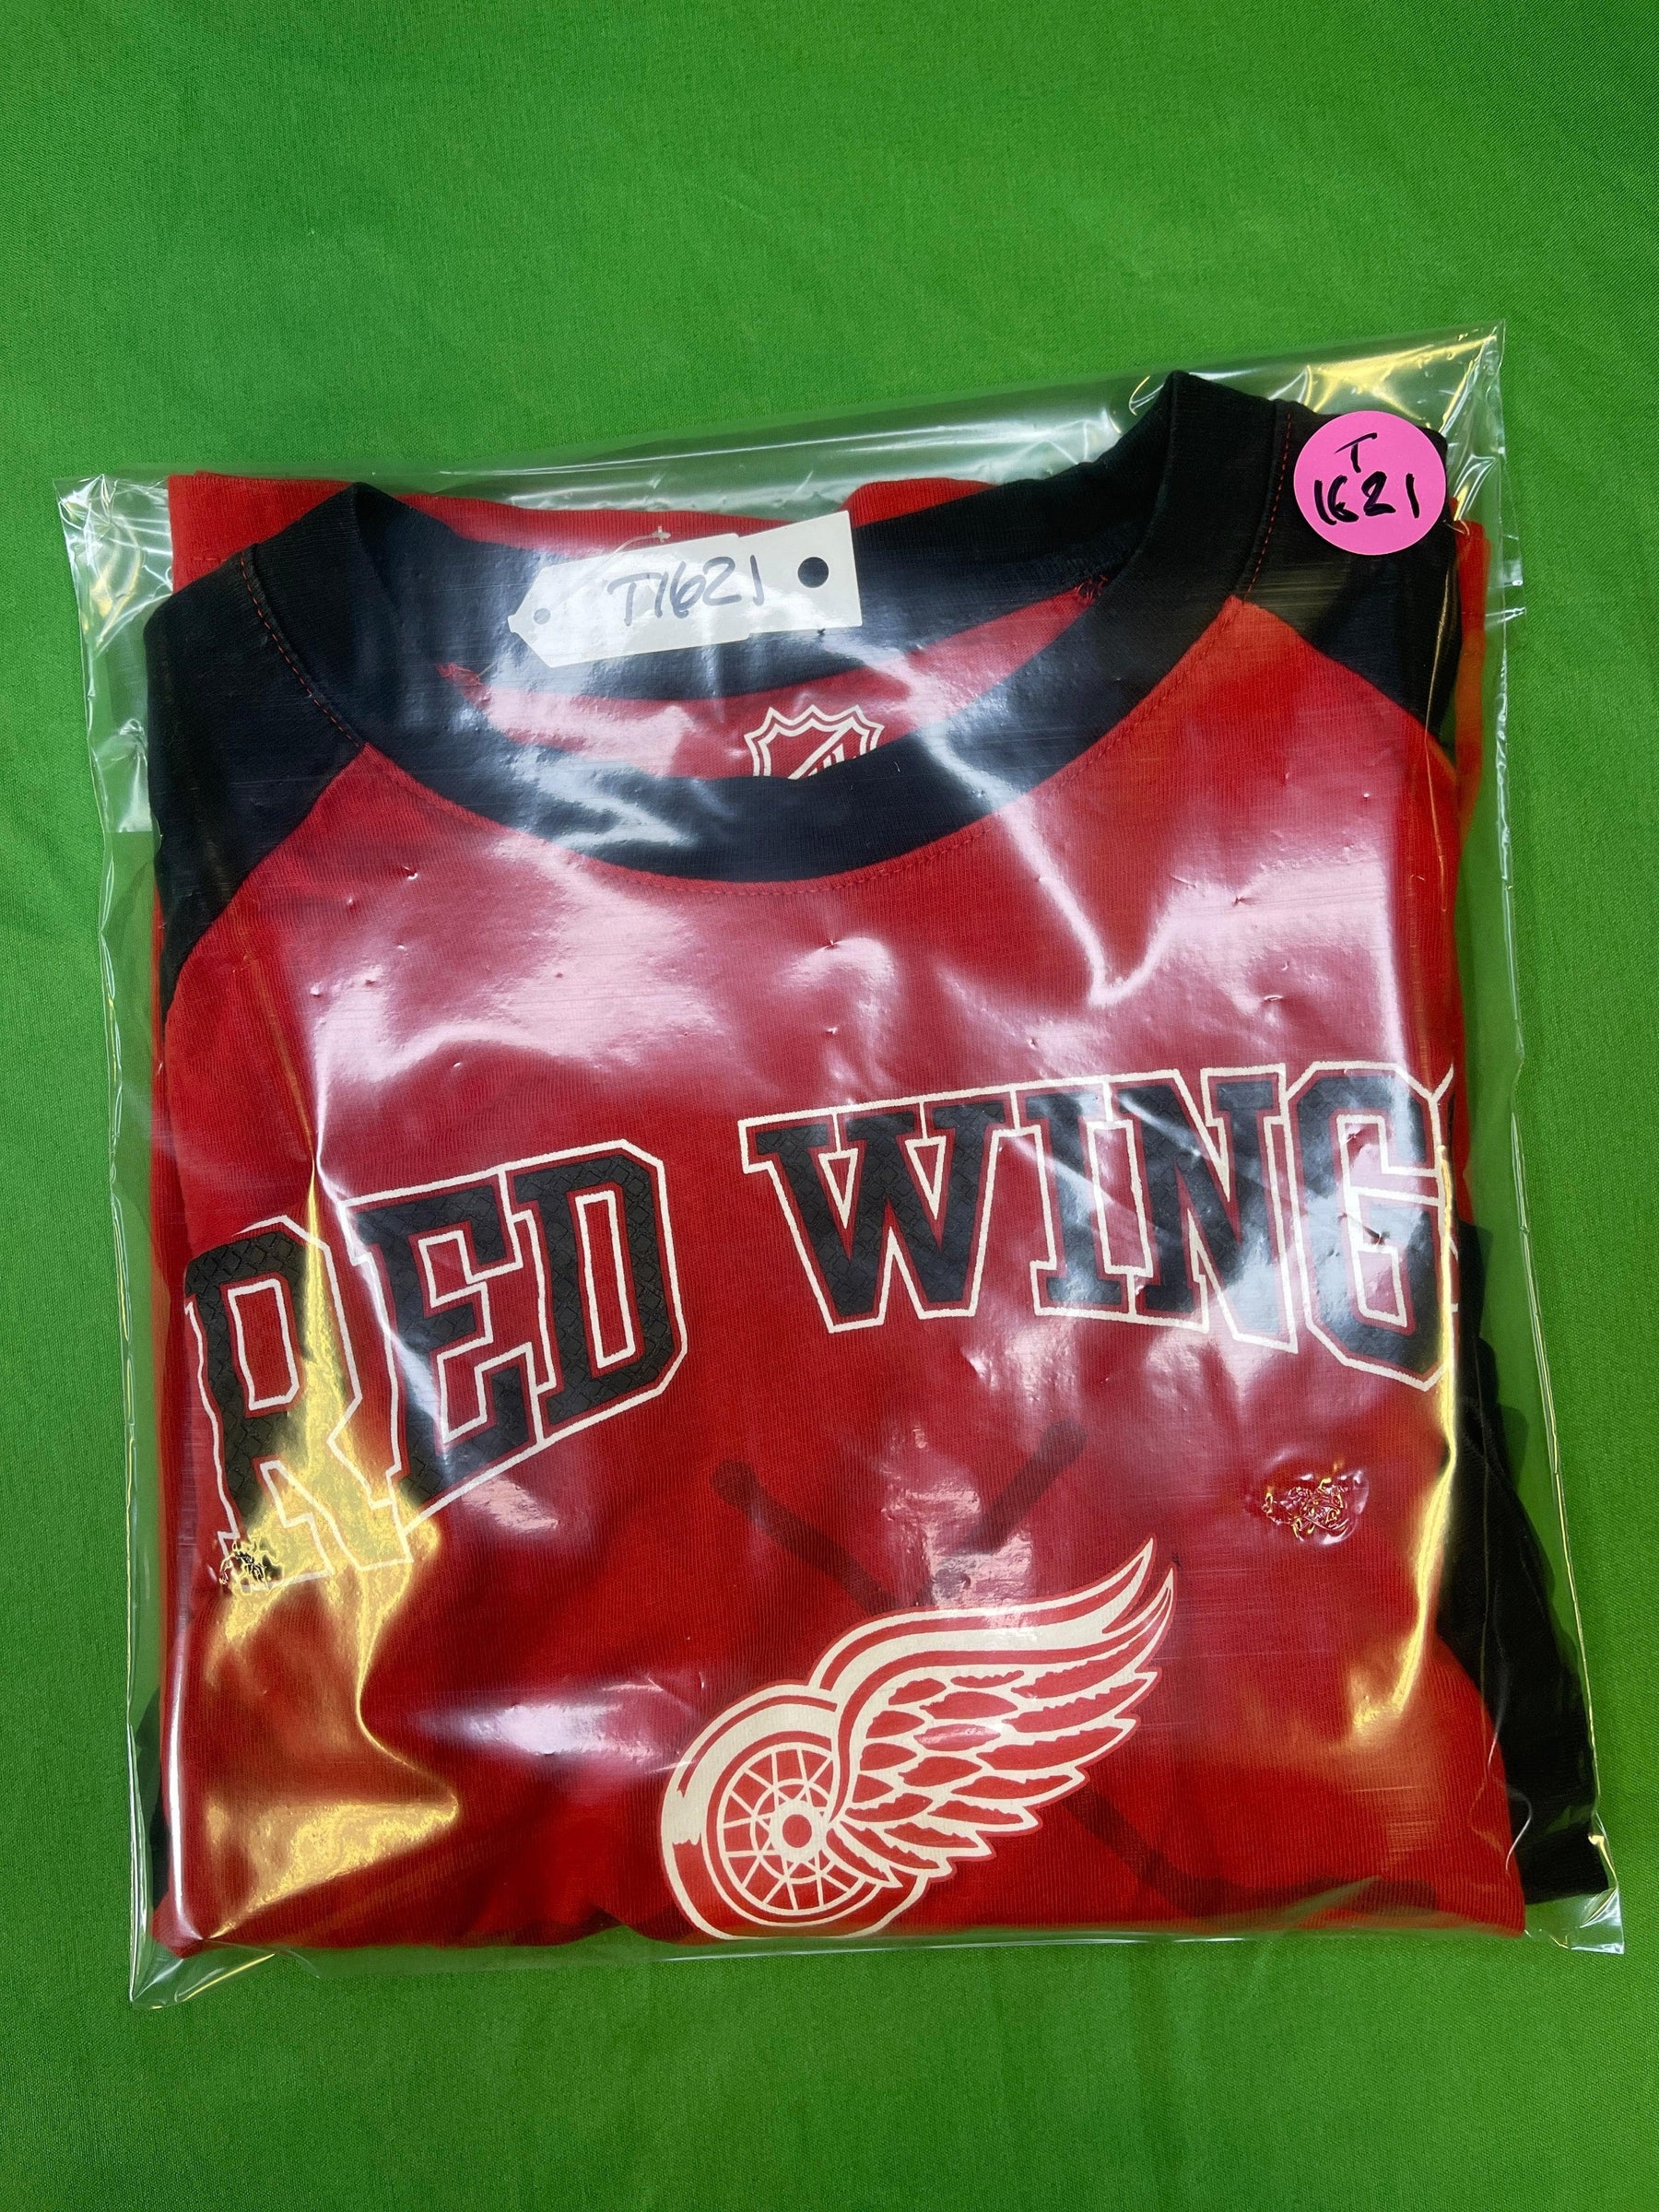 NHL Detroit Red Wings L/S Raglan Sleeve T-Shirt Youth Small 8